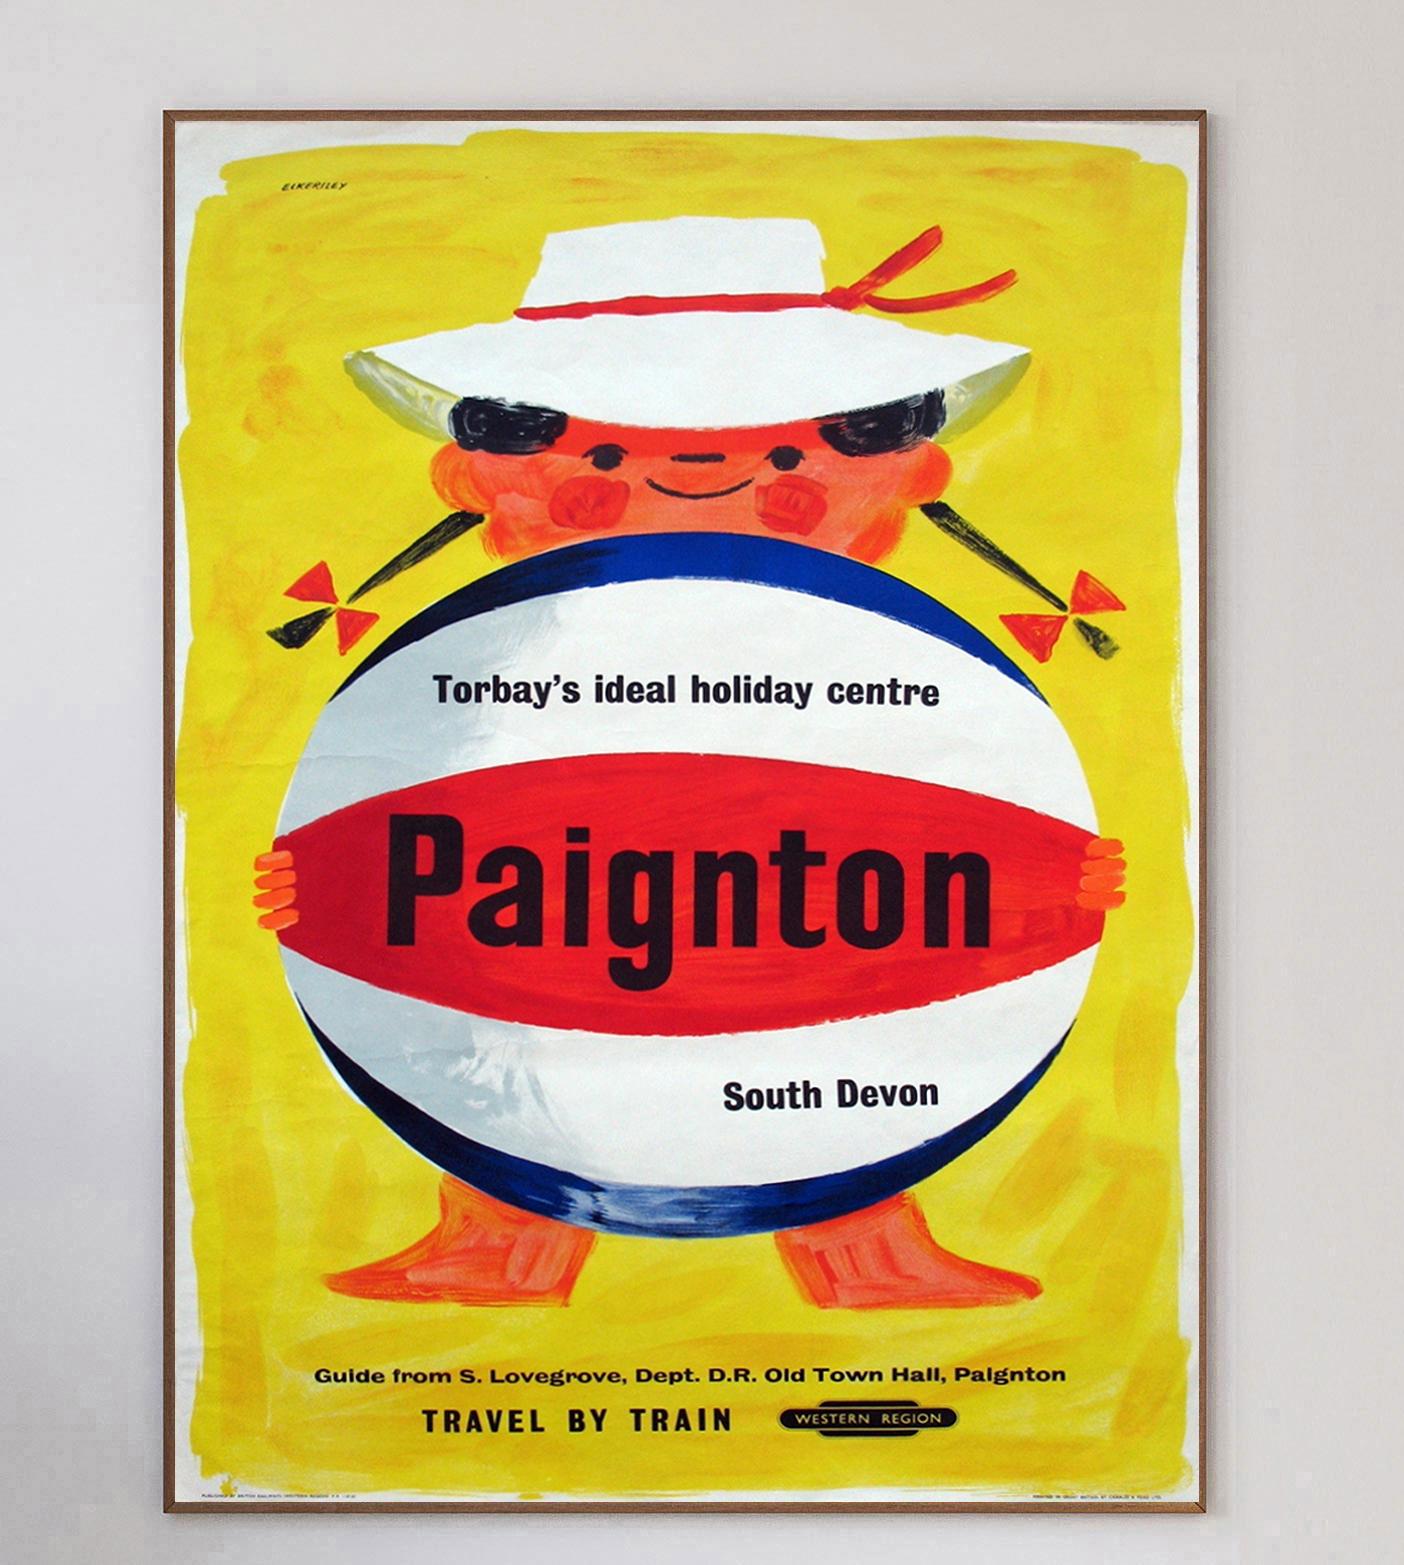 This wonderfully playful poster was created in 1960 for British Railways, promoting their routes to Paignton in Devon, England. Reading 